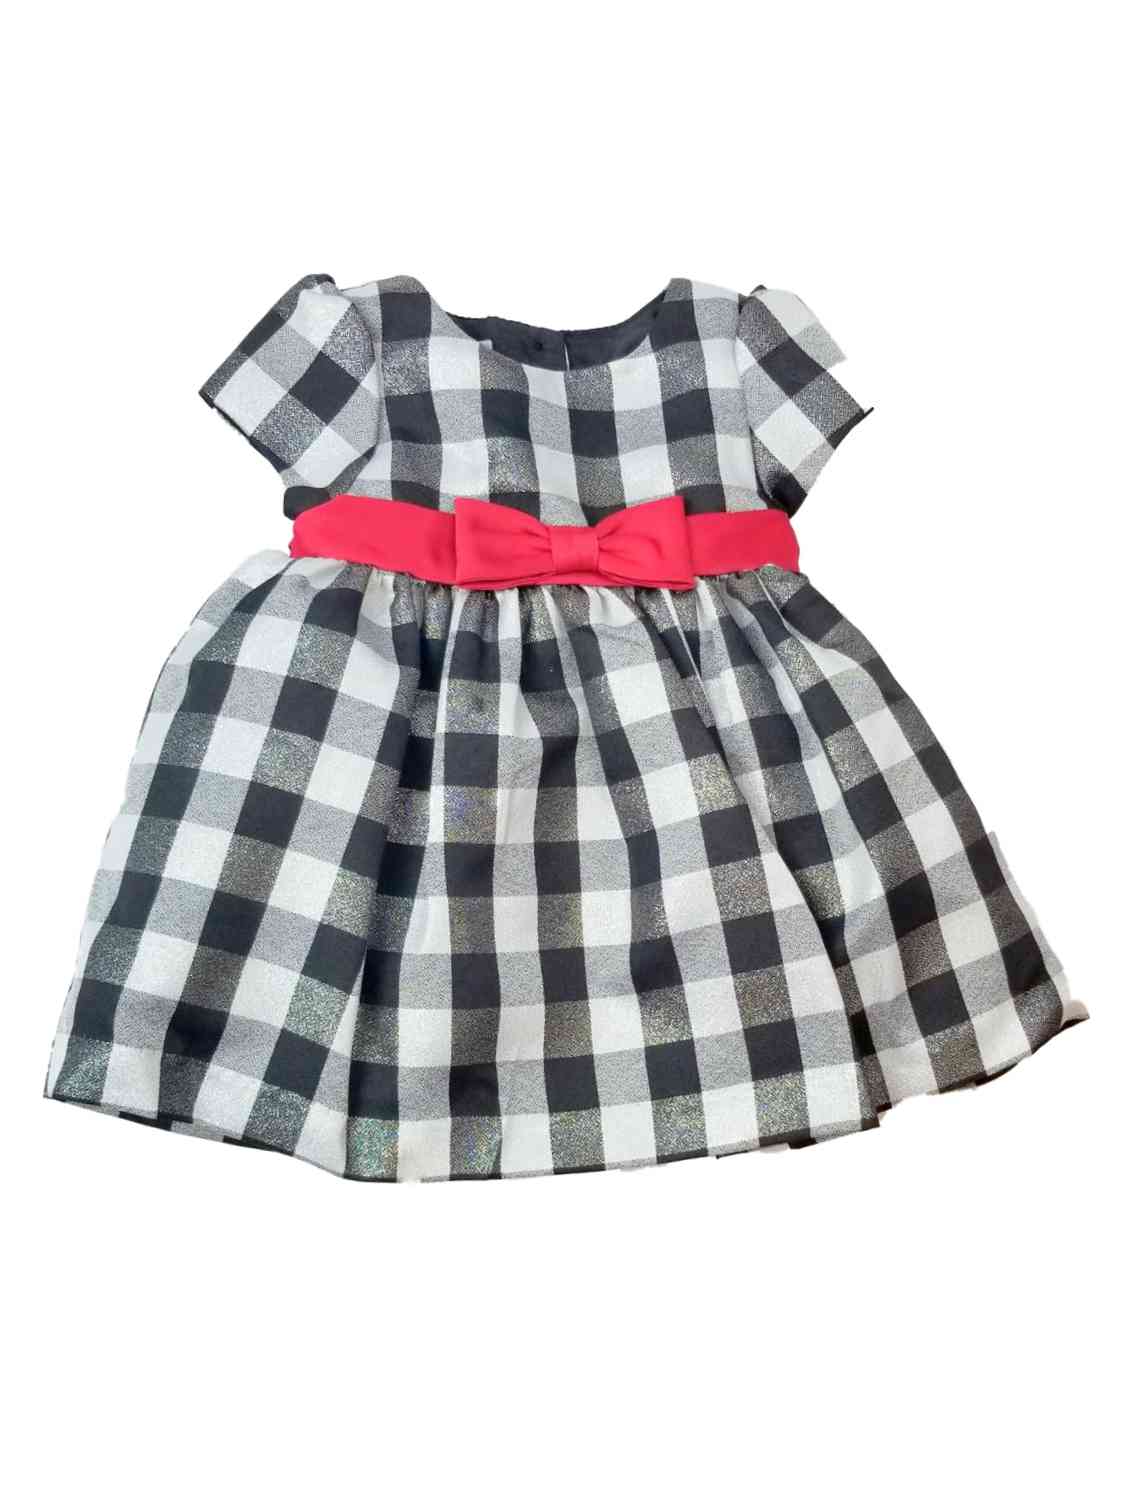 Special Occasions Infant Baby Girls Black Silver Red Sparkle Christmas Holiday Party Dress 3-6M